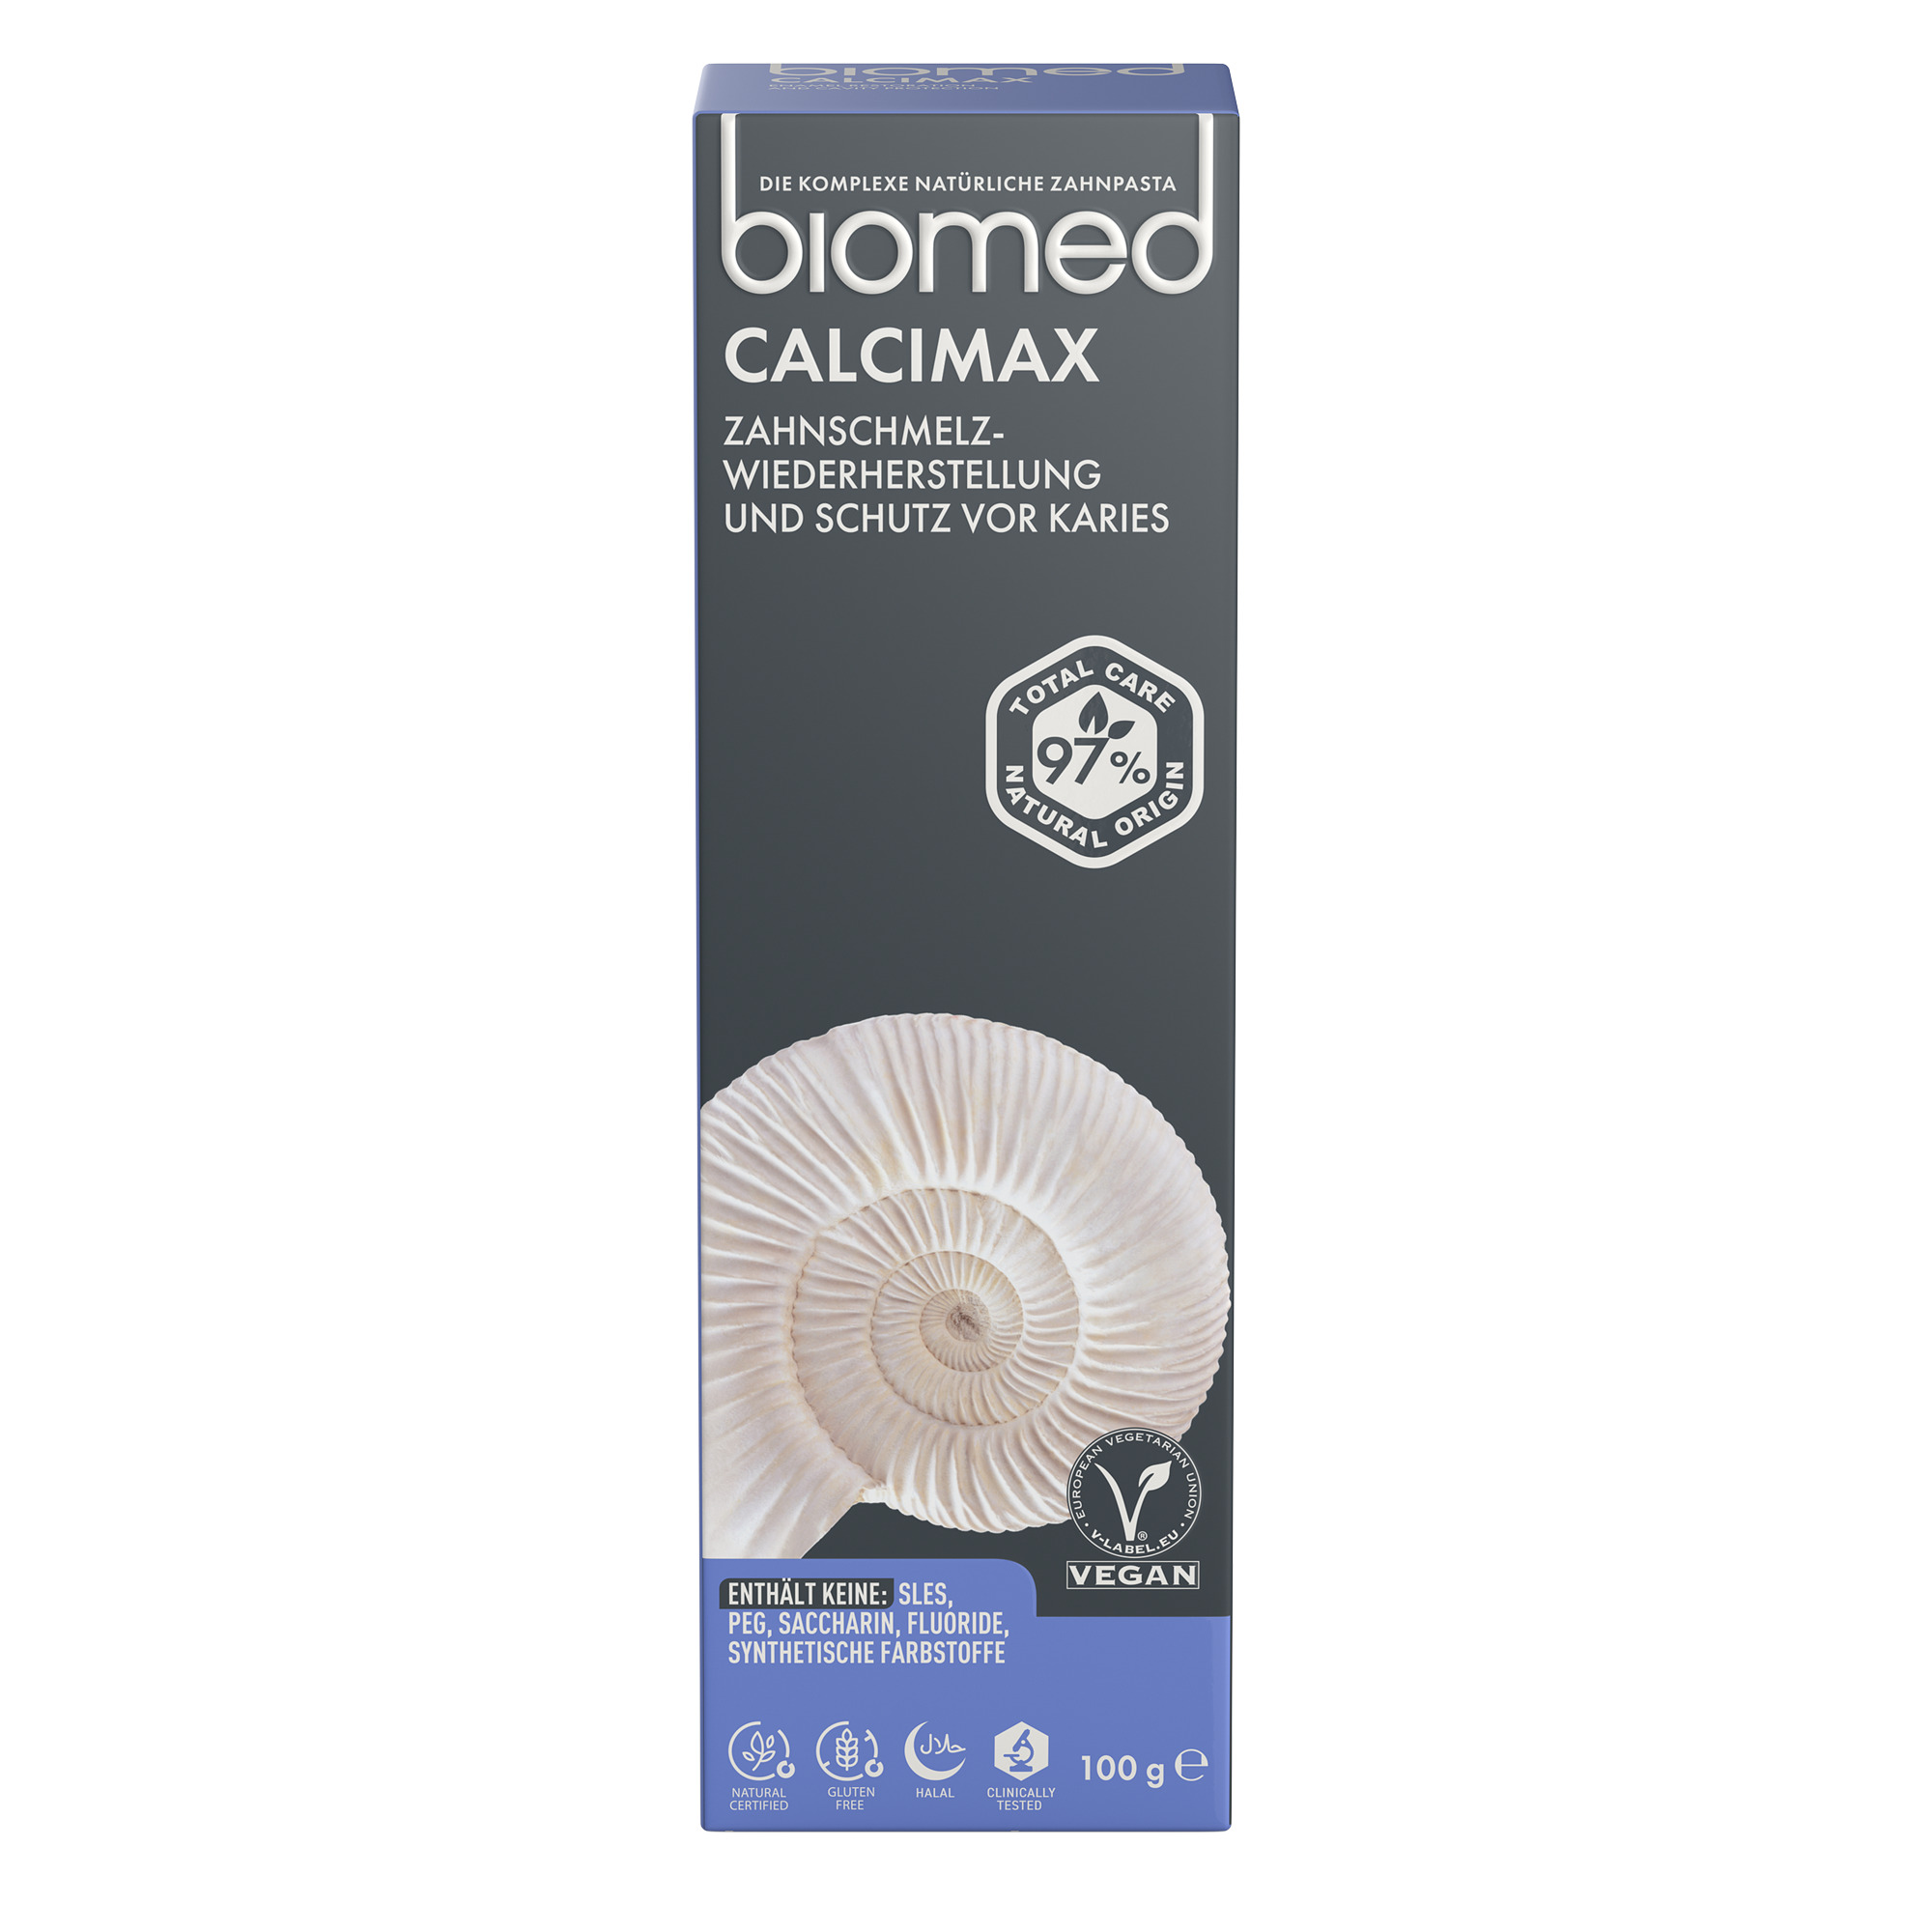 Biomed calcimax (2)